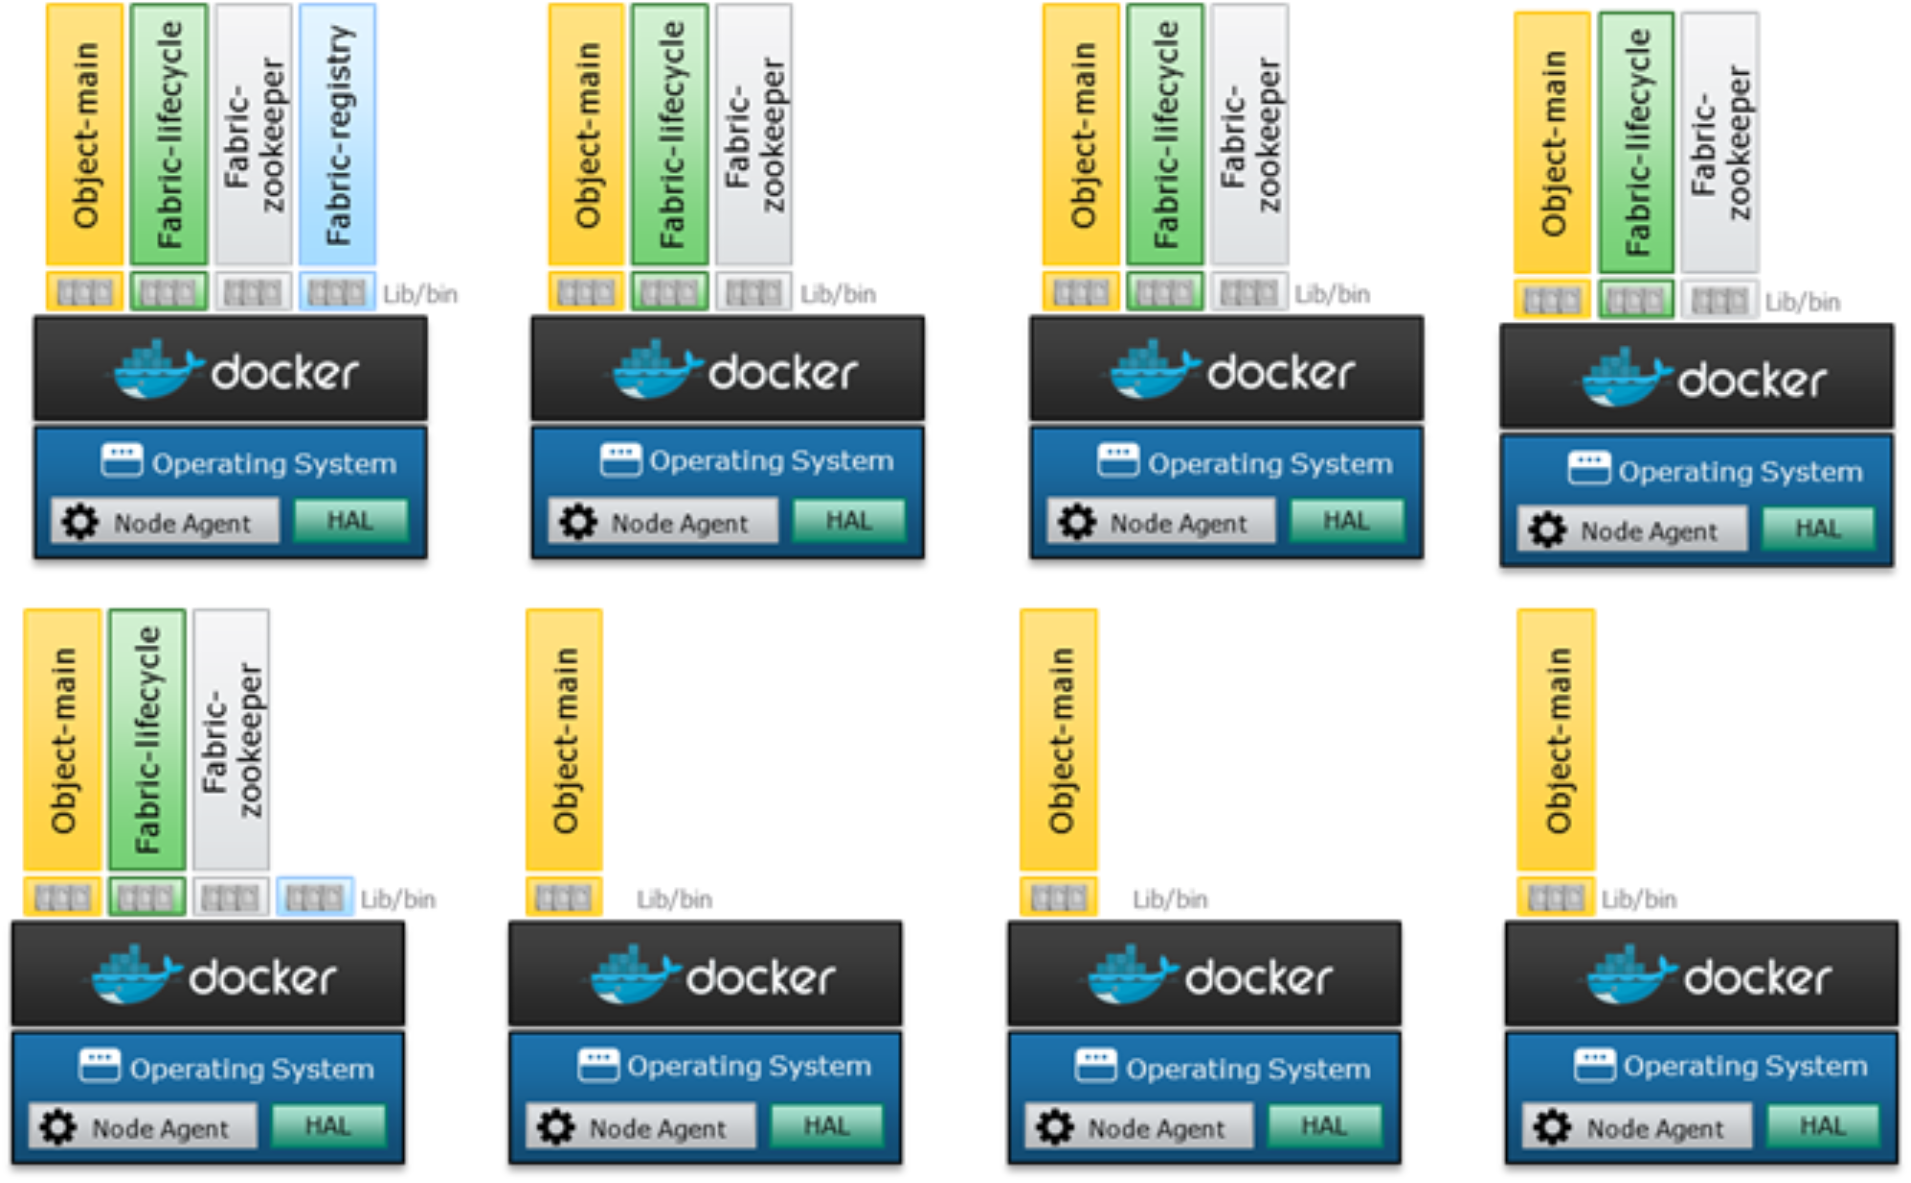 This is a Docker containers and agents on eight node deployment example. Eight node instances shown with all eight nodes running object-main container. One node running fabric registry container. Five nodes running fabric lifecycle and zookeeper containers.